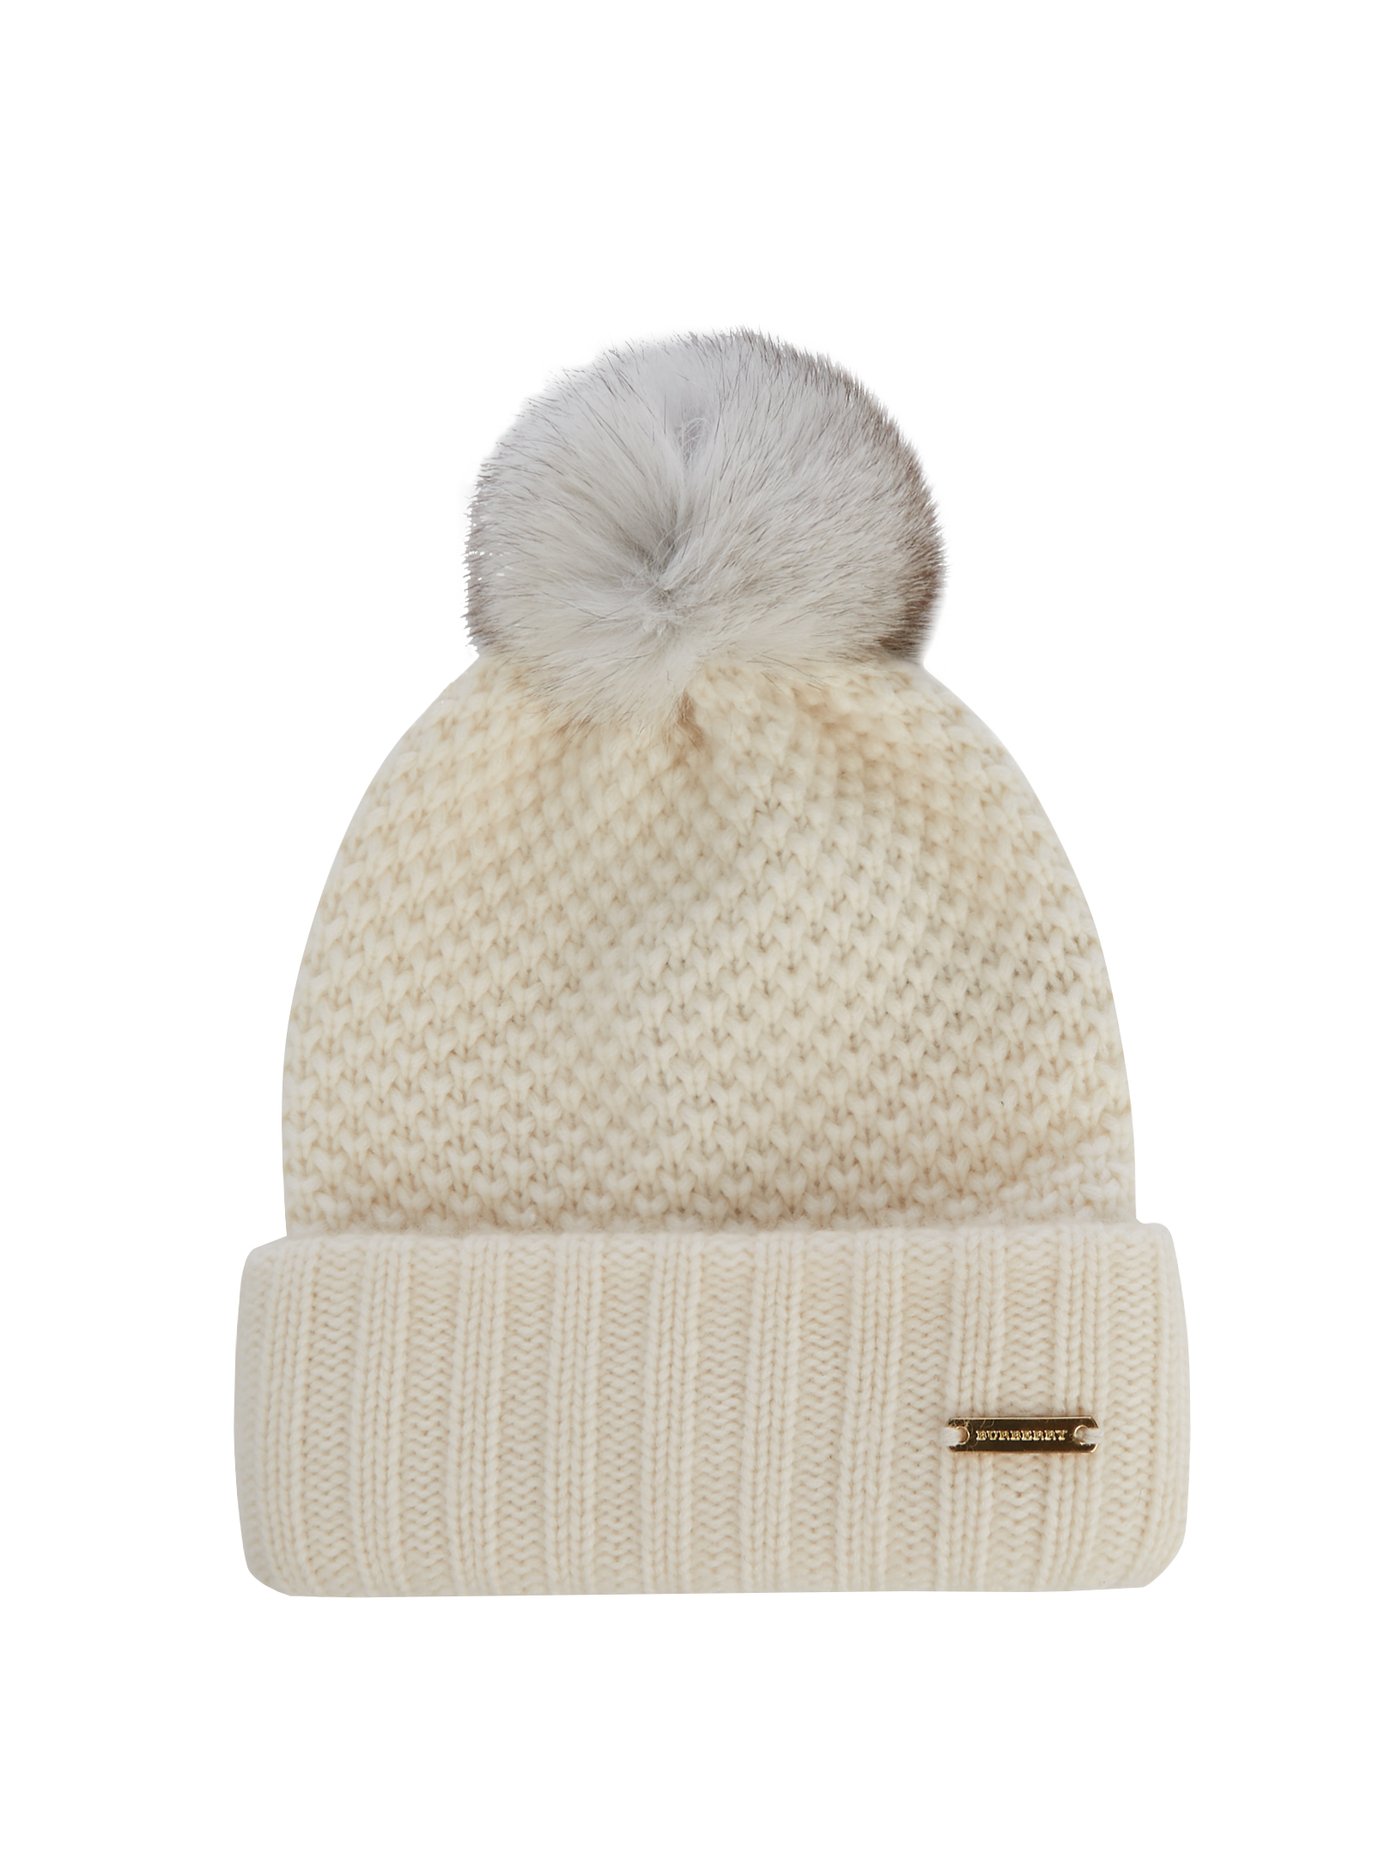 burberry cashmere hat